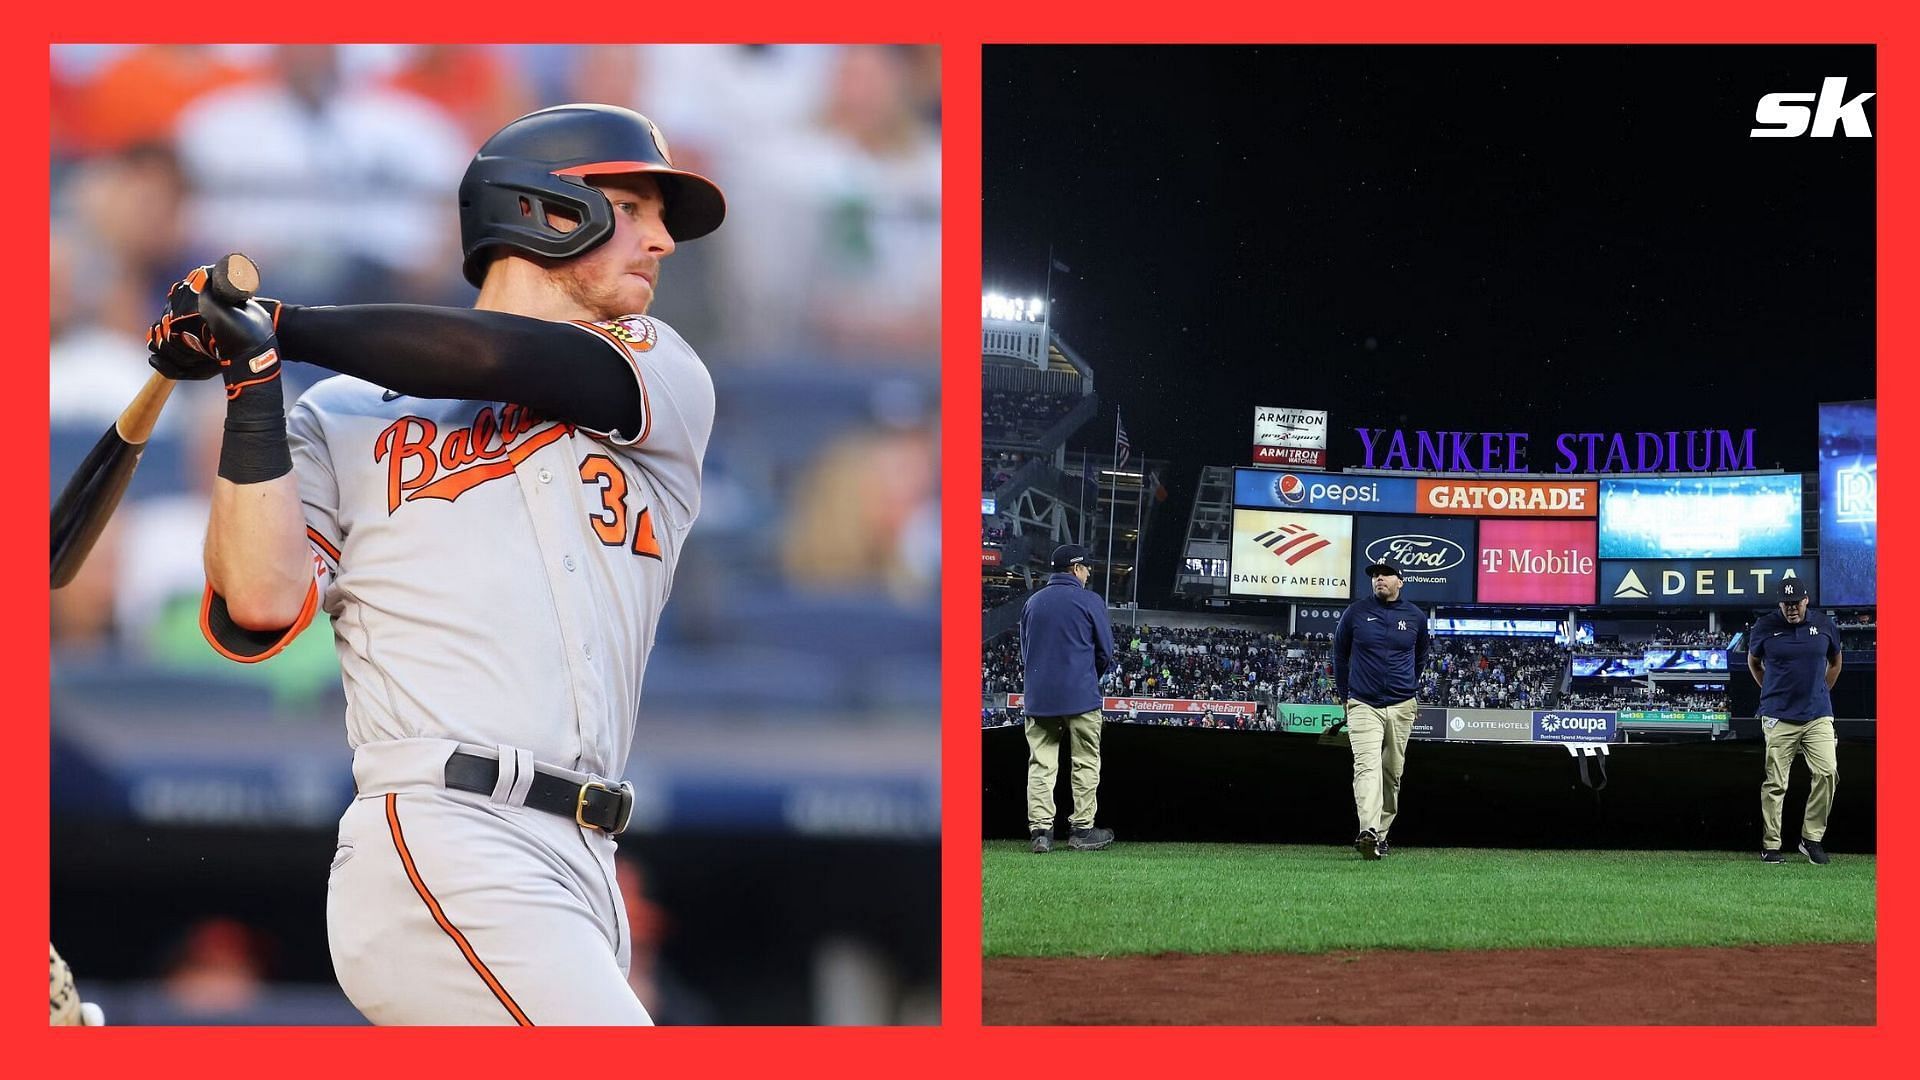 Is New York Yankees vs Baltimore Orioles cancelled on July 4?